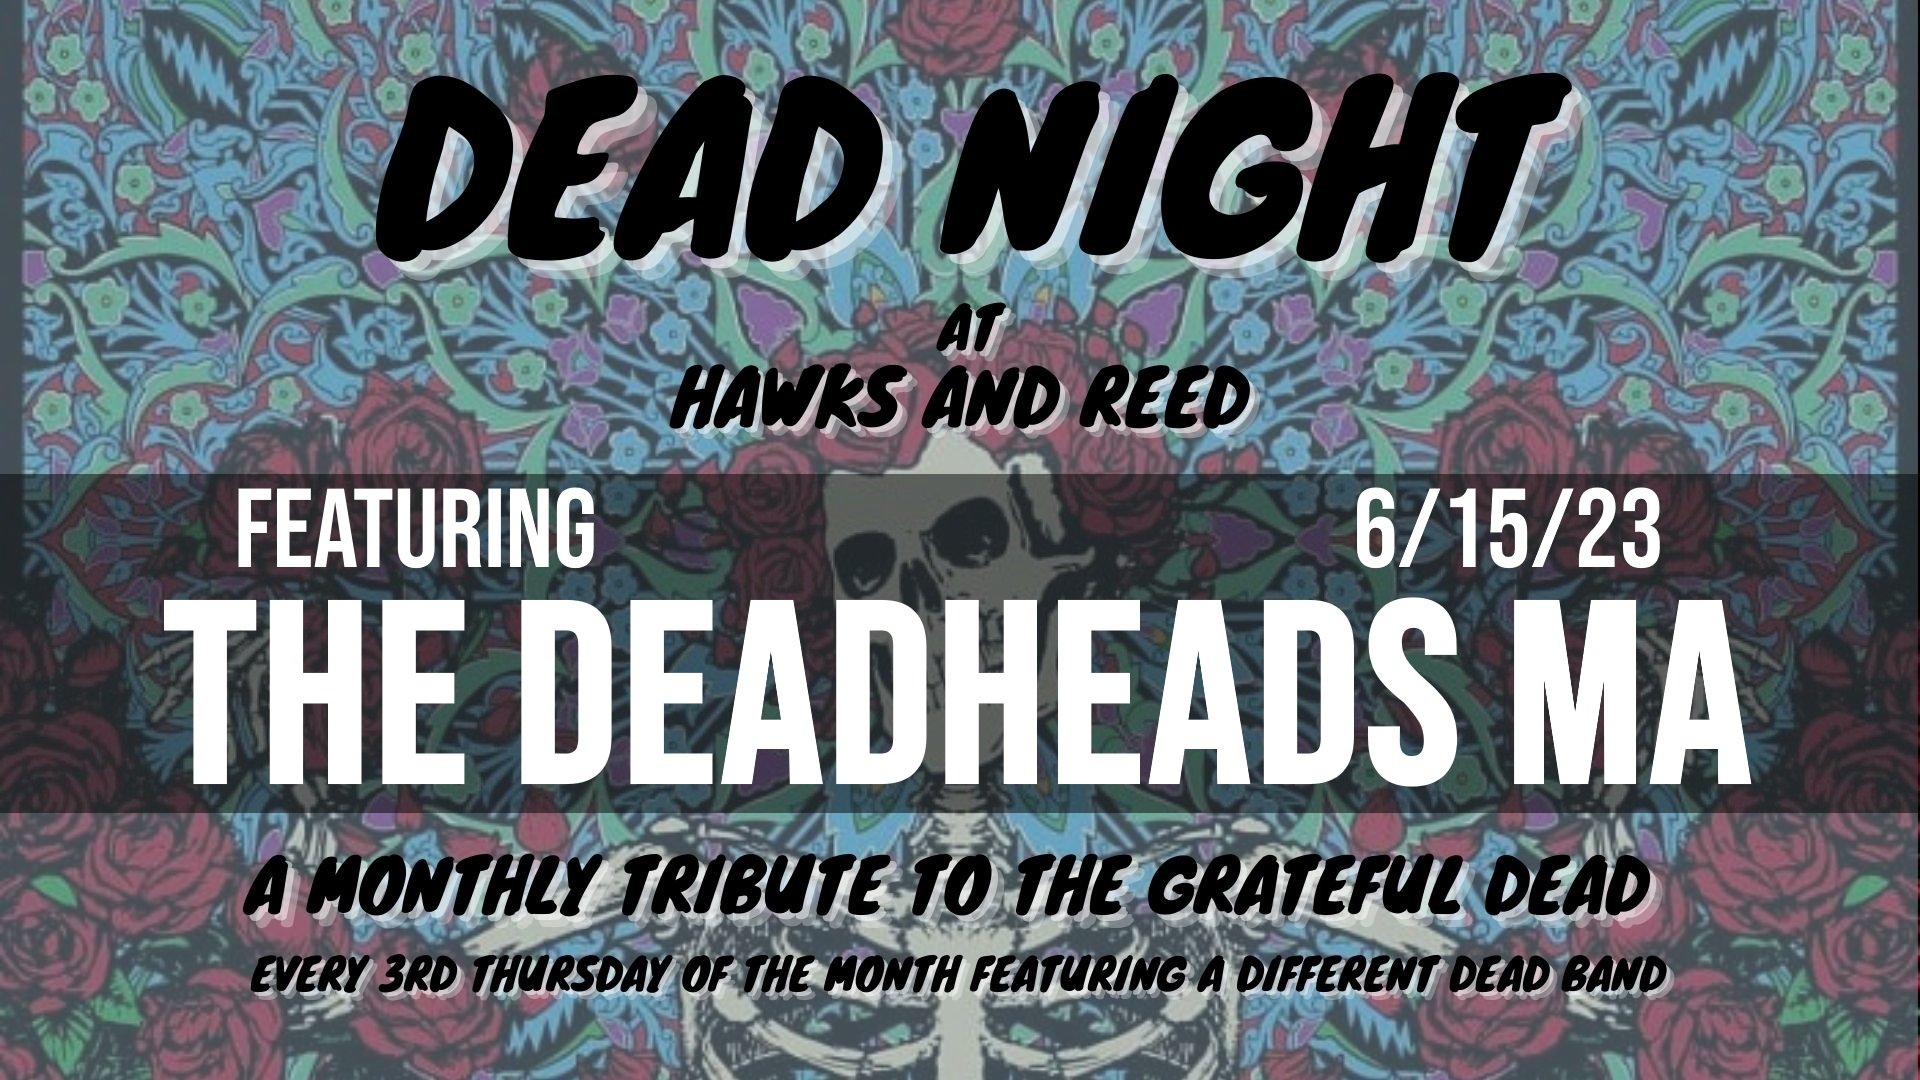 Grateful Dead Night with The Deadheads MA